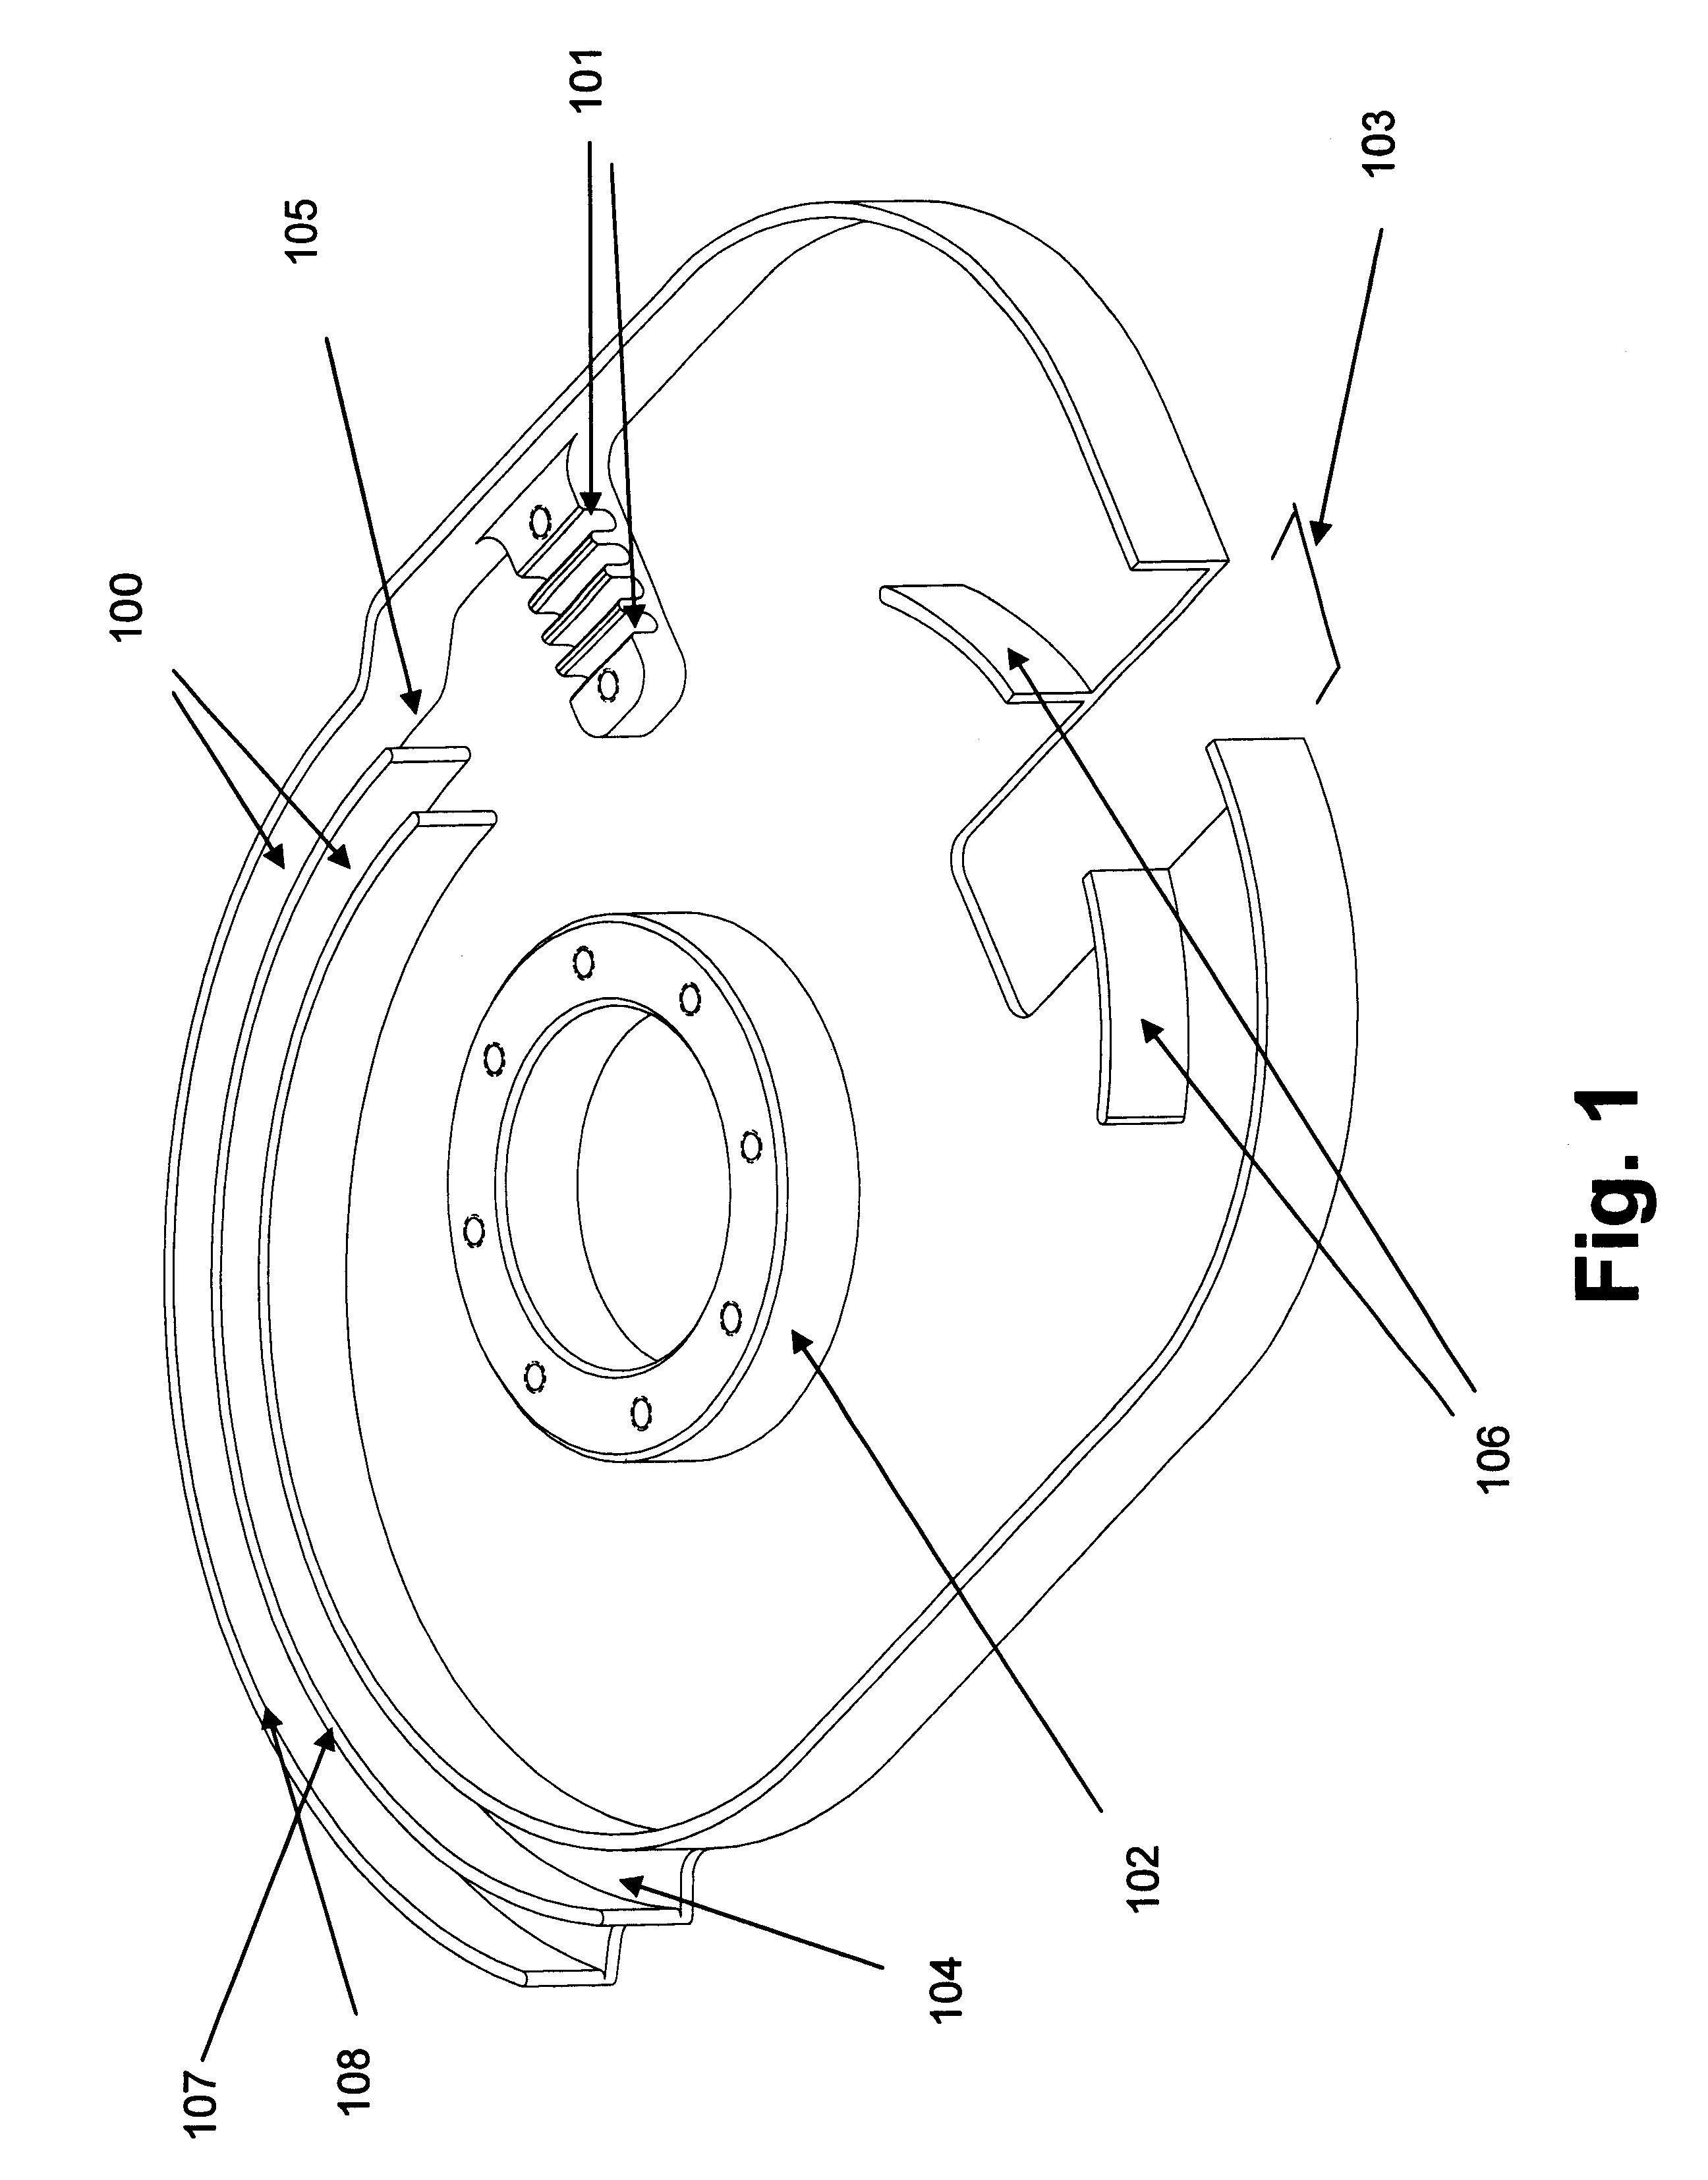 Optical fiber clamping apparatus to hold fiber cable while providing retractable distance across module unit